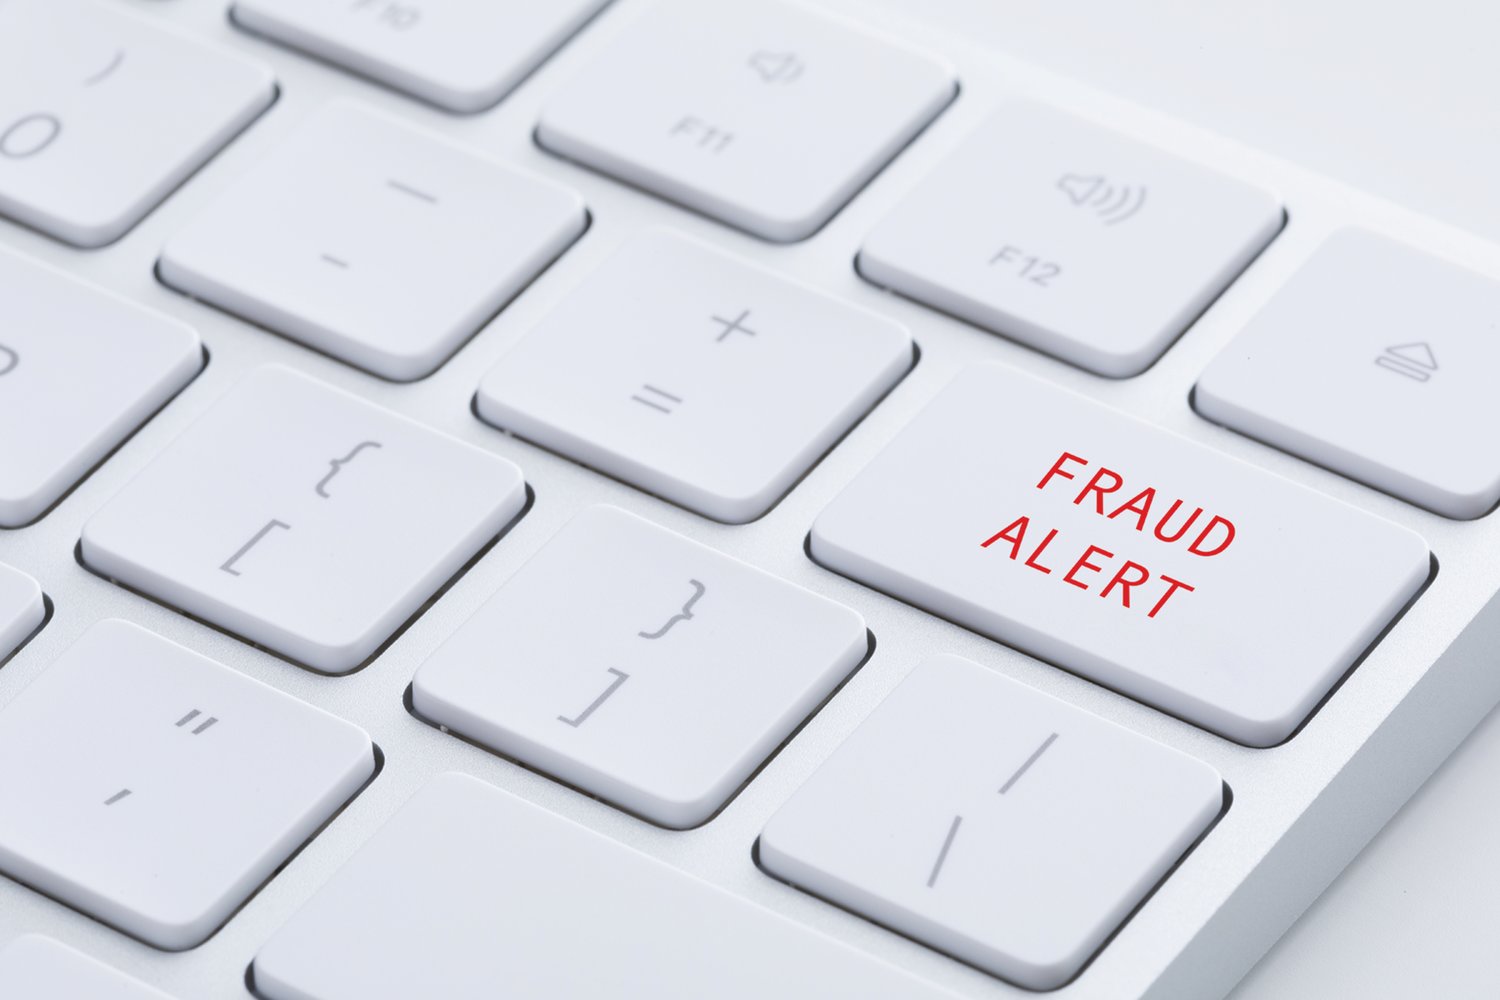 Fraudsters are impersonating financial institutions claiming that a customer’s account is compromised “due to unusual activity,” but the message is an attempt to deceive the recipient into sharing personal information, according to the New York State Division of Consumer Protection.